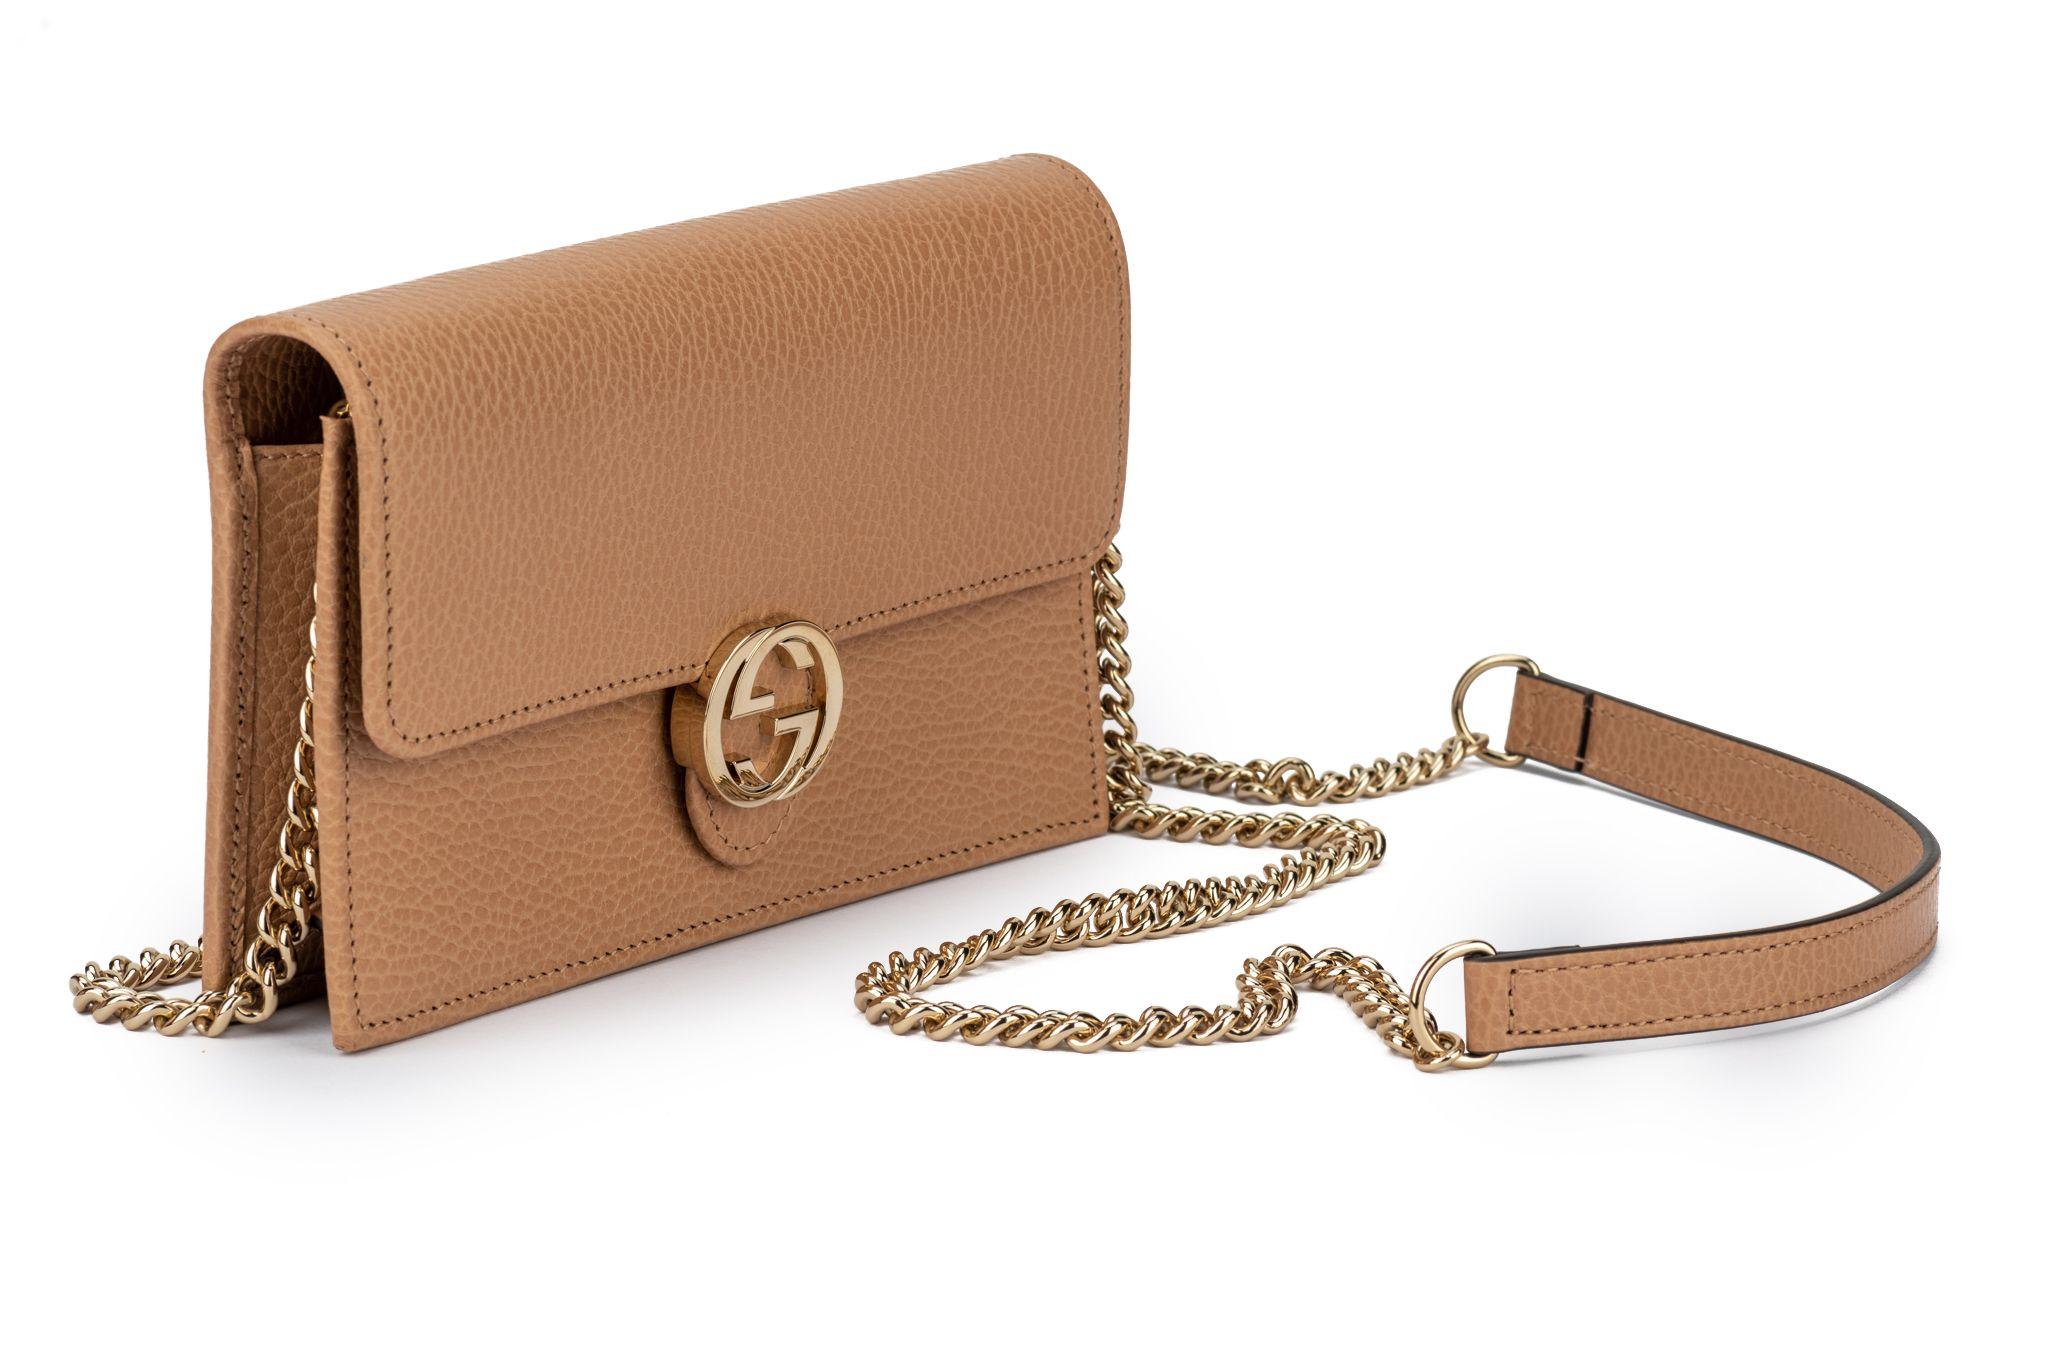 Gucci New Camel Leather Cross Body/Clutch Bag For Sale 10